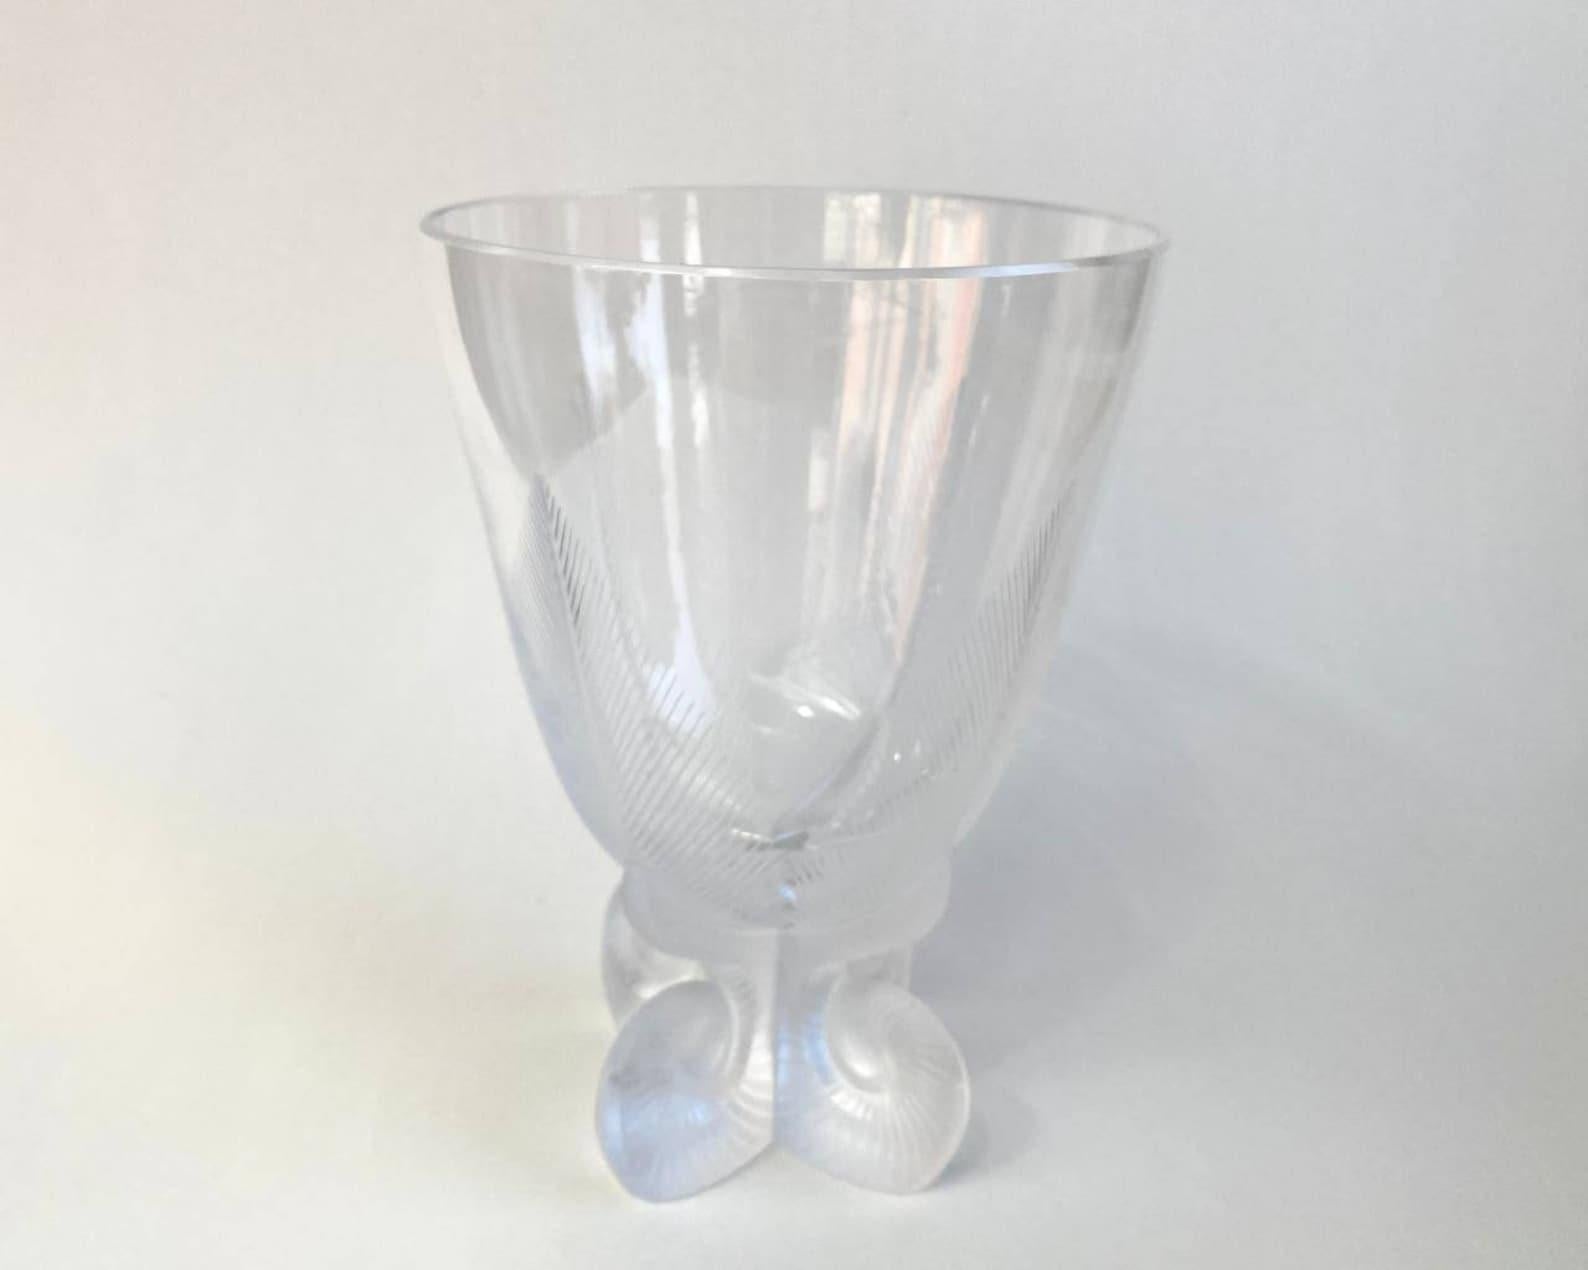 Lalique Osmonde fern leaf frosted vase with legs. 

 The vase has four feet on the base and is decorated with cut fern leaf designs. It is a high quality clear and frosted crystal. It is marked on the bottom - Lalique, France.

 The model is